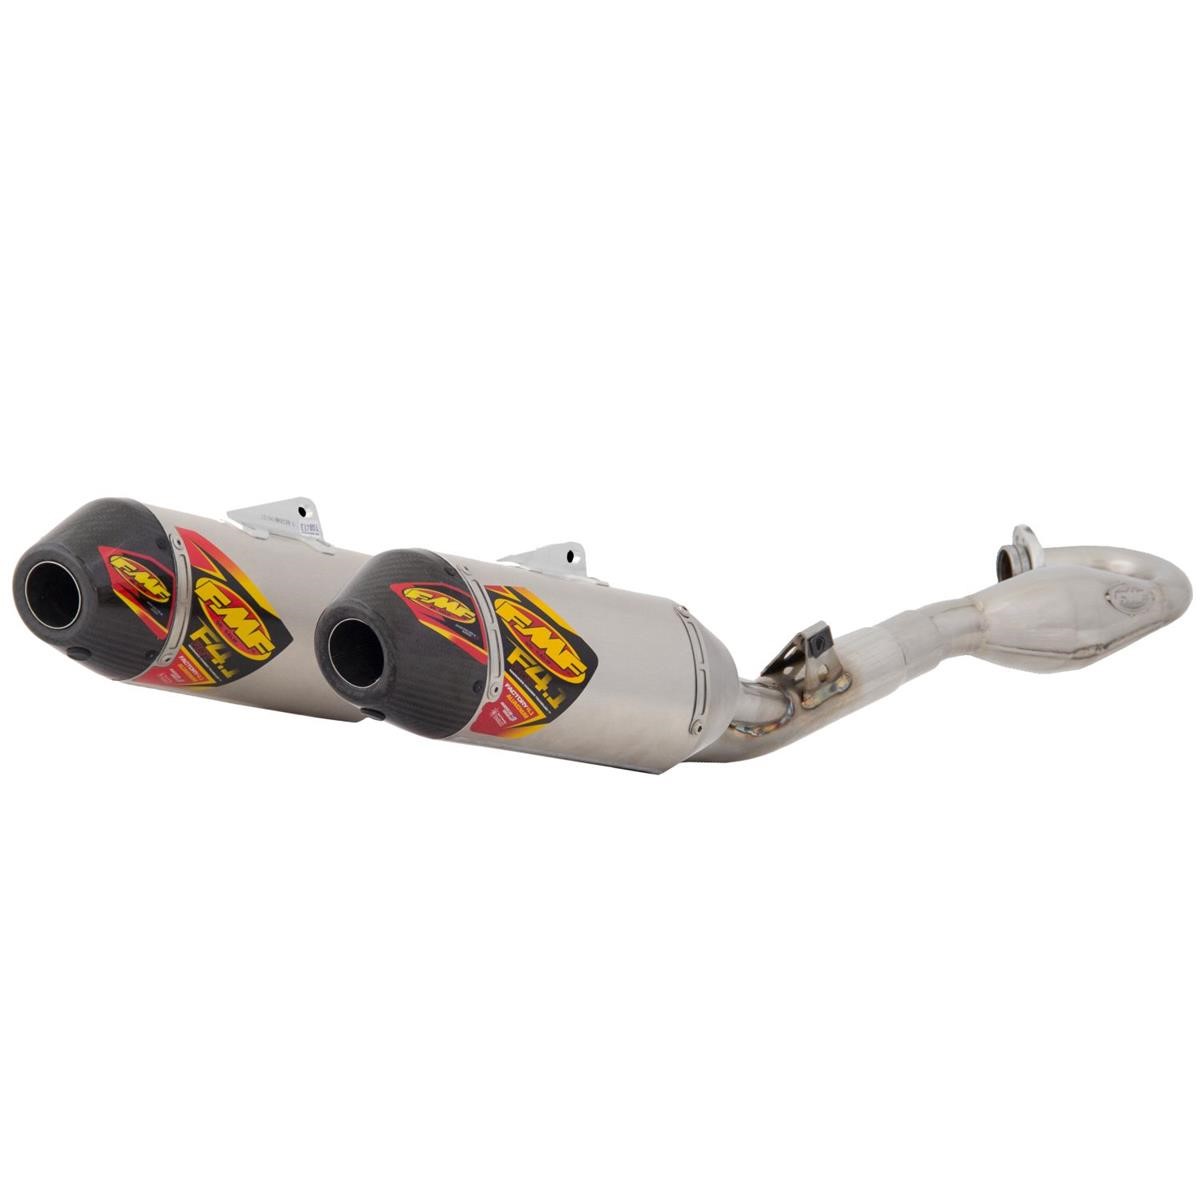 FMF Exhaust System Factory 4.1 RCT Dual, Honda CRF 450 15-16, Stainless steel/Aluminium/Carbon